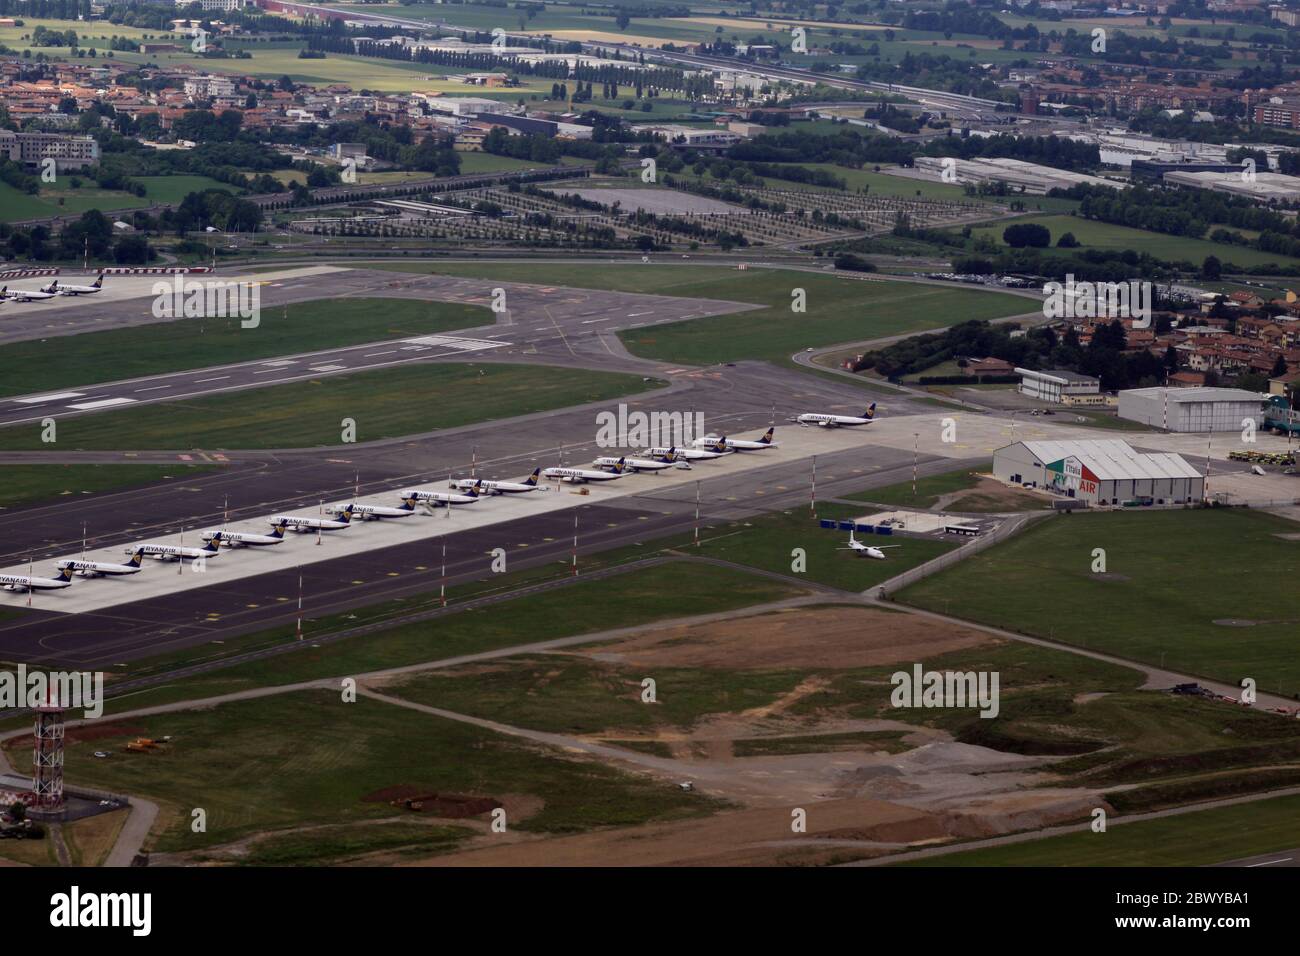 Aerial view of Bergamo airport, which is a Ryanair hub. Dozens of grounded planes line up in Bergamo (LIME/BGY) International Airport due to lockdown measures for coronavirus 2019. The airport itself closed and air traffic is reduced. The planes are flown regularly to keep them airworthy. Stock Photo